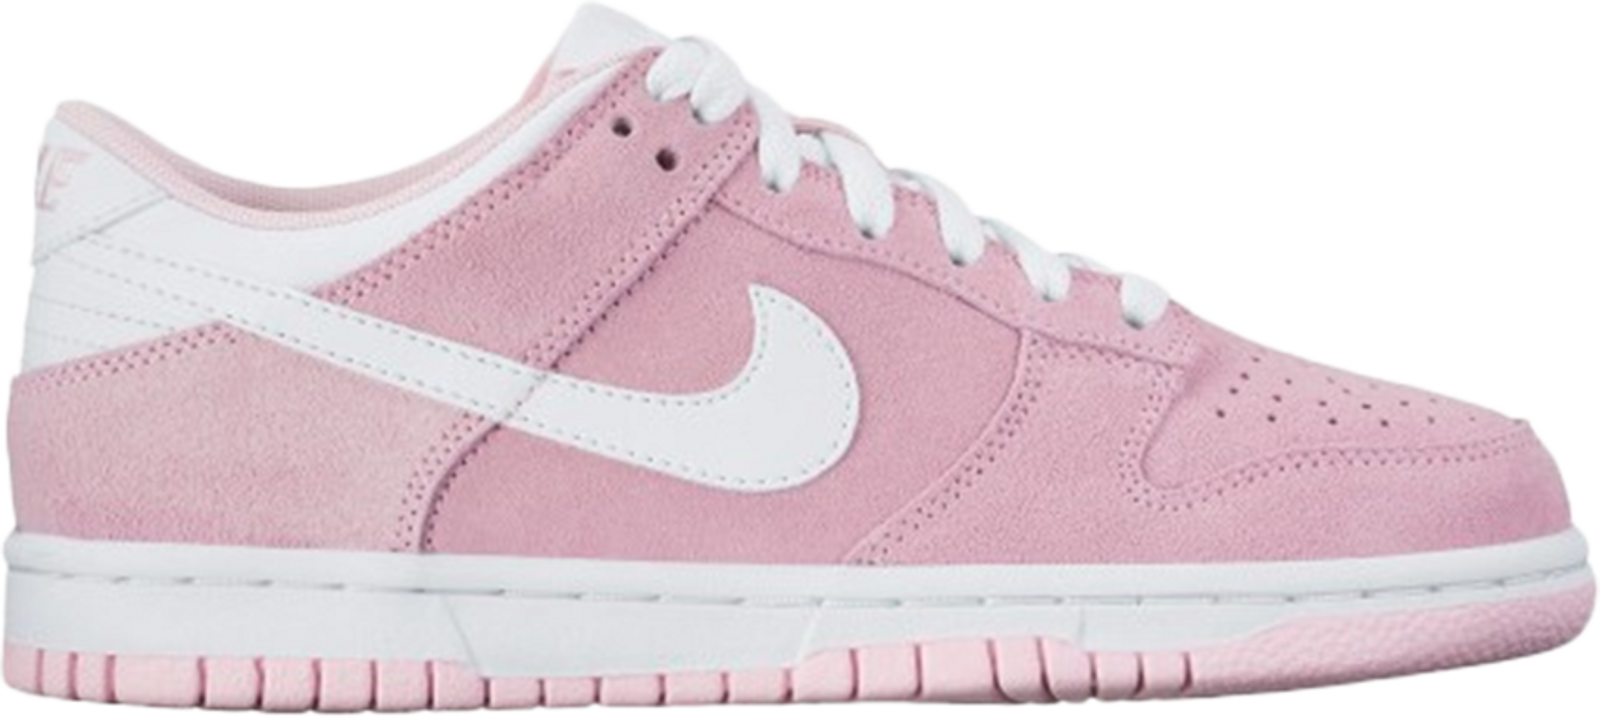 Buy Dunk Low GS 'Prism Pink' - 309601 604 | GOAT